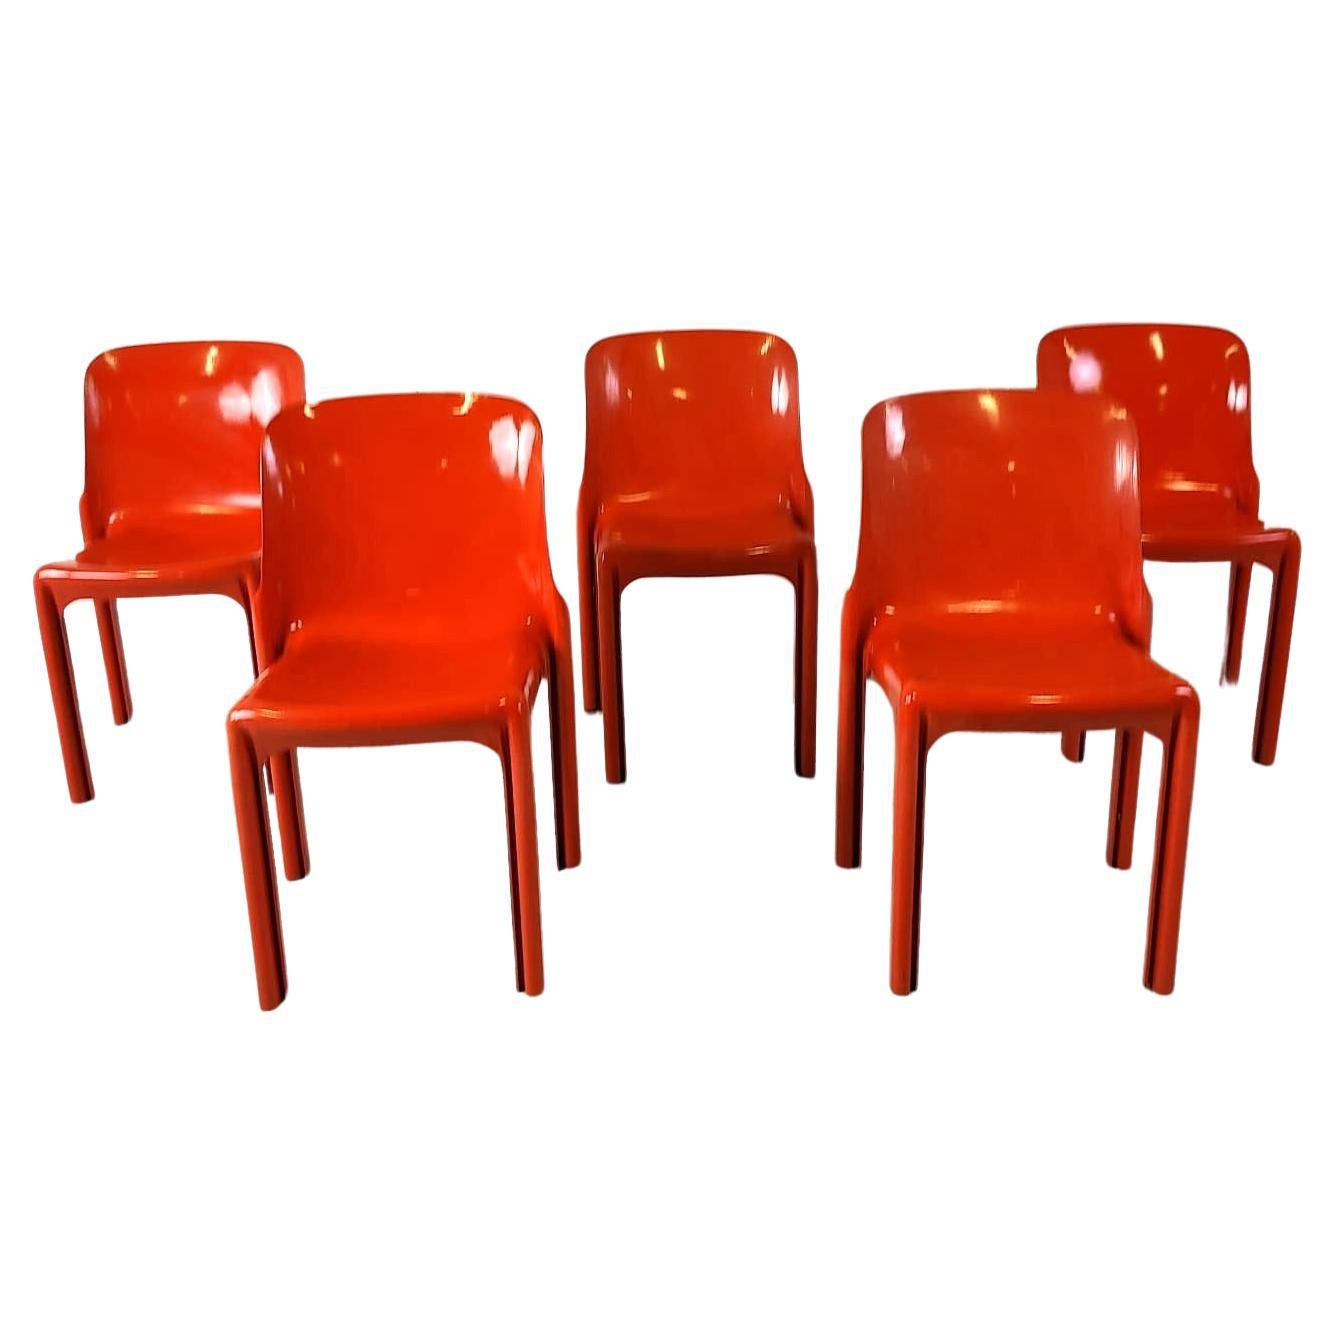 Set of 5 plastic dining chairs model 'Selene' designed by Vico Magistretti and produced by Artemide.

Beautiful and timeless space age design.

The chairs are stackable

Good condition

1970s - italy

Measurements
Height: 75cm/29.52